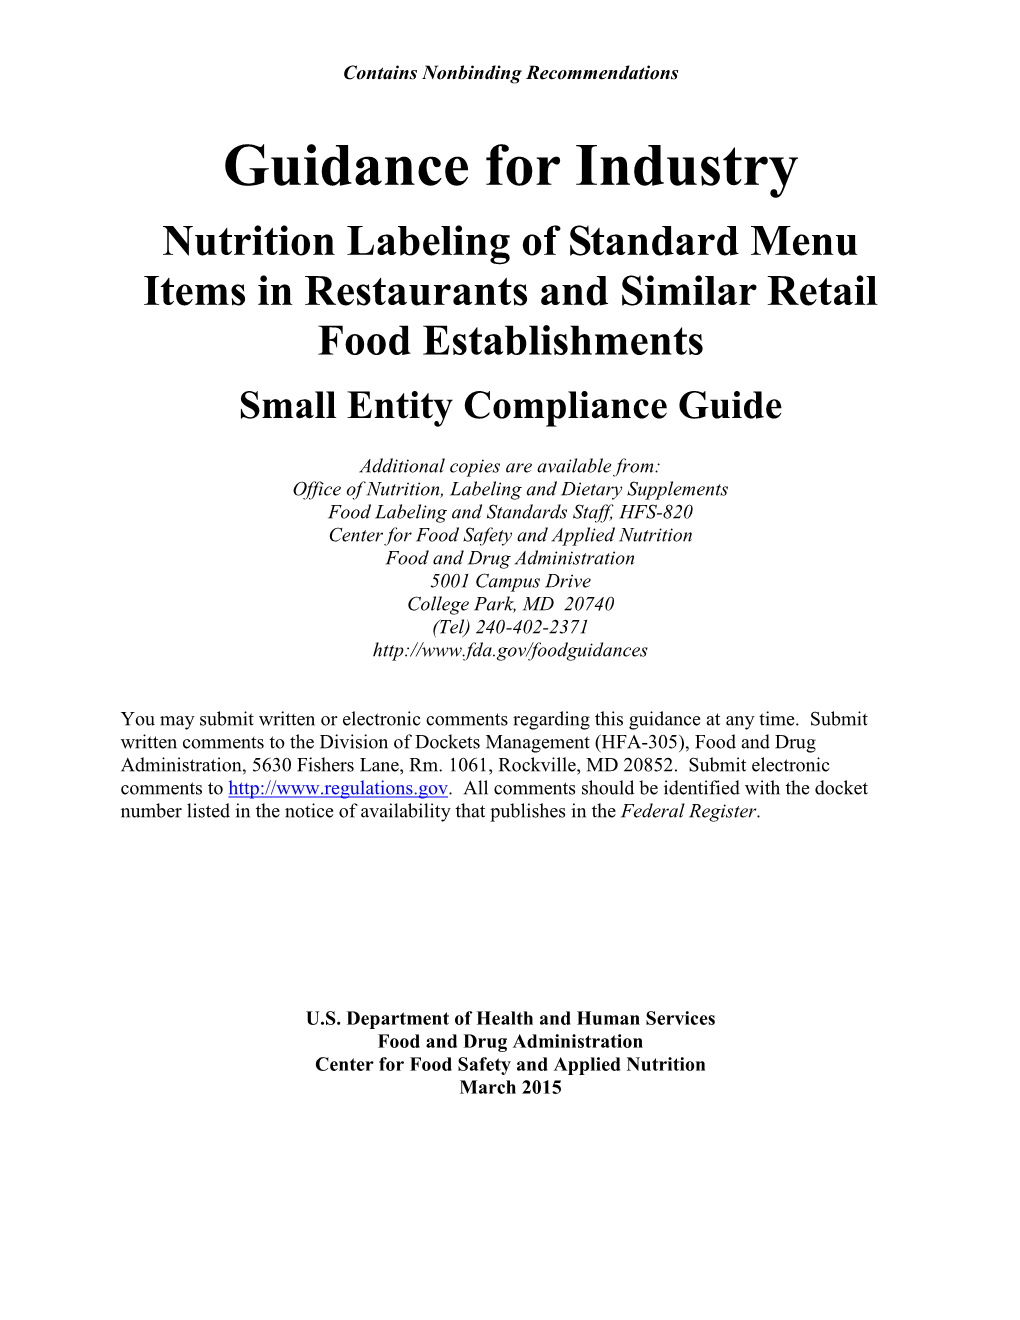 Guidance for Industry Nutrition Labeling of Standard Menu Items in Restaurants and Similar Retail Food Establishments Small Entity Compliance Guide